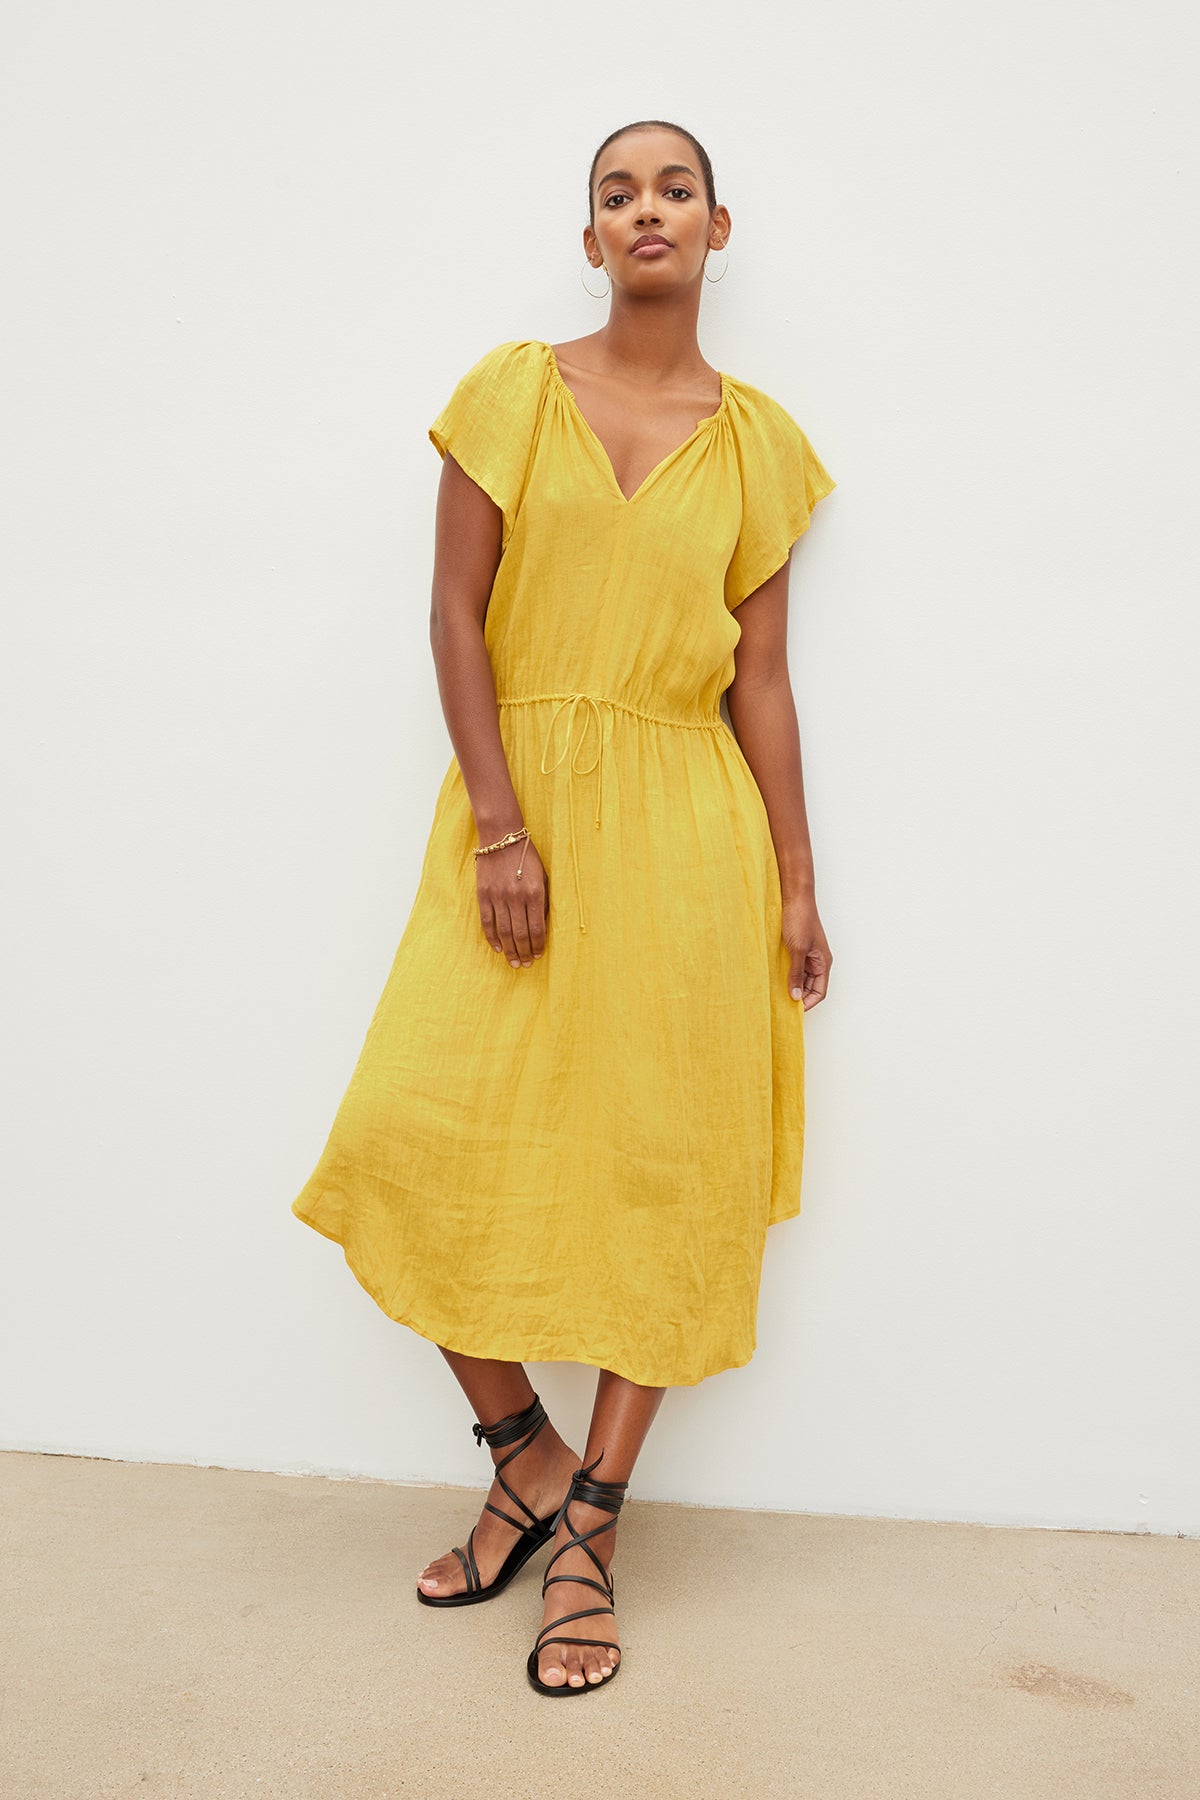   Woman in a yellow PEPPER LINEN V-NECK DRESS by Velvet by Graham & Spencer with a drawstring waist and black sandals stands against a white wall, looking directly at the camera. 